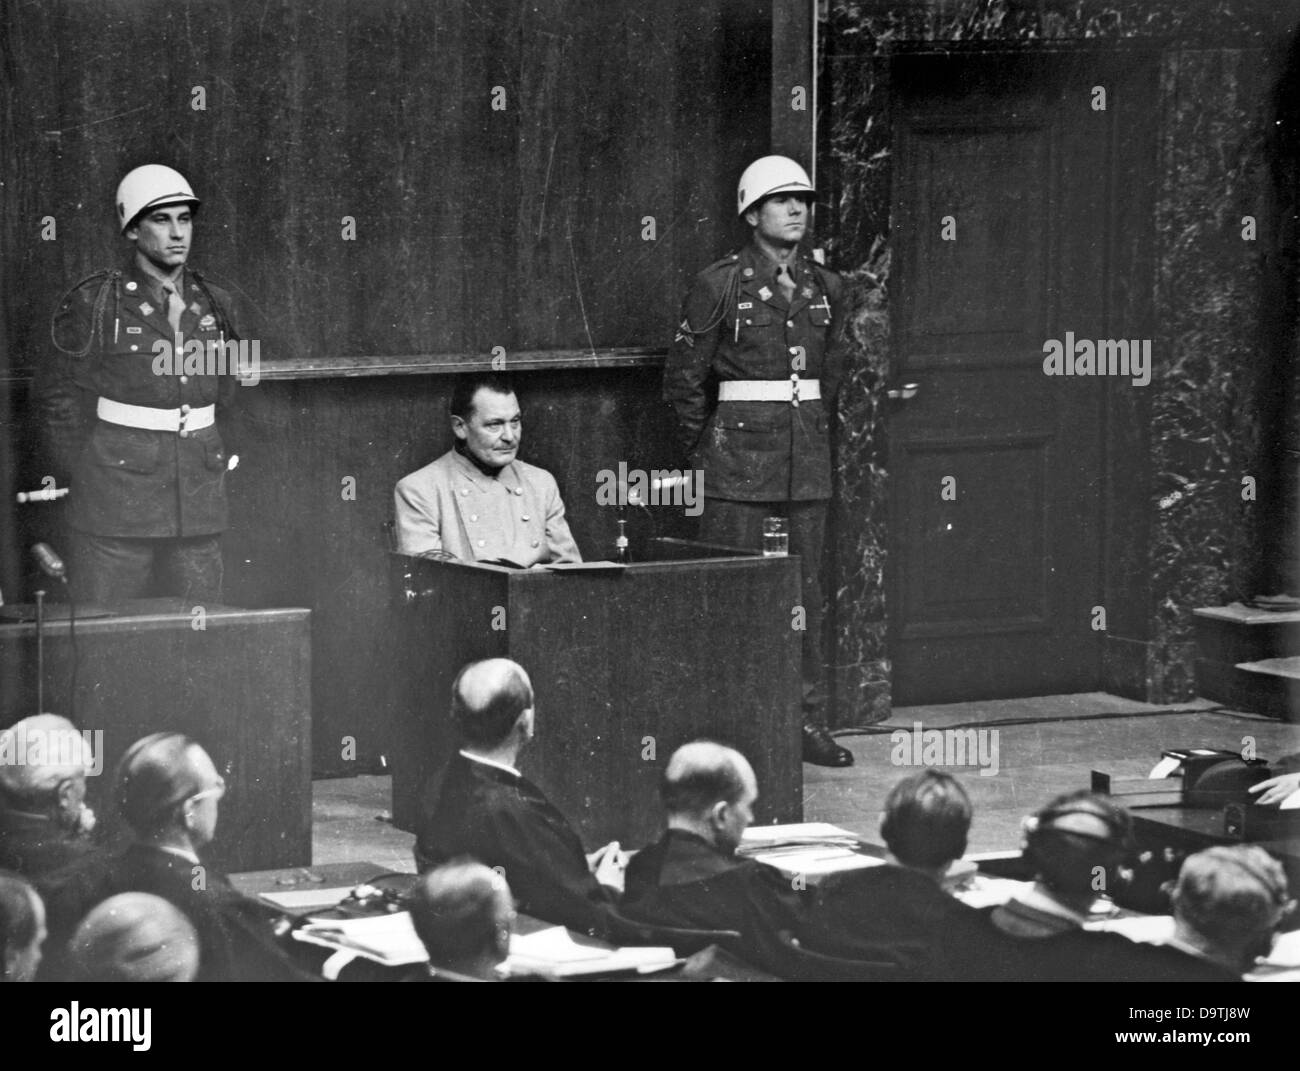 The Nazi war criminal Hermann Göring (m) is pictured in the dock during the Nuremberg Trials in the context of the International Military Tribunal against the major war criminals of World War II in Nuremberg, Germany, in 1946. The photo was taken by the Soviet photographer Yevgeny Khaldei, who was commissioned by the USSR to cover the trials. Photo: Yevgeny Khaldei Stock Photo